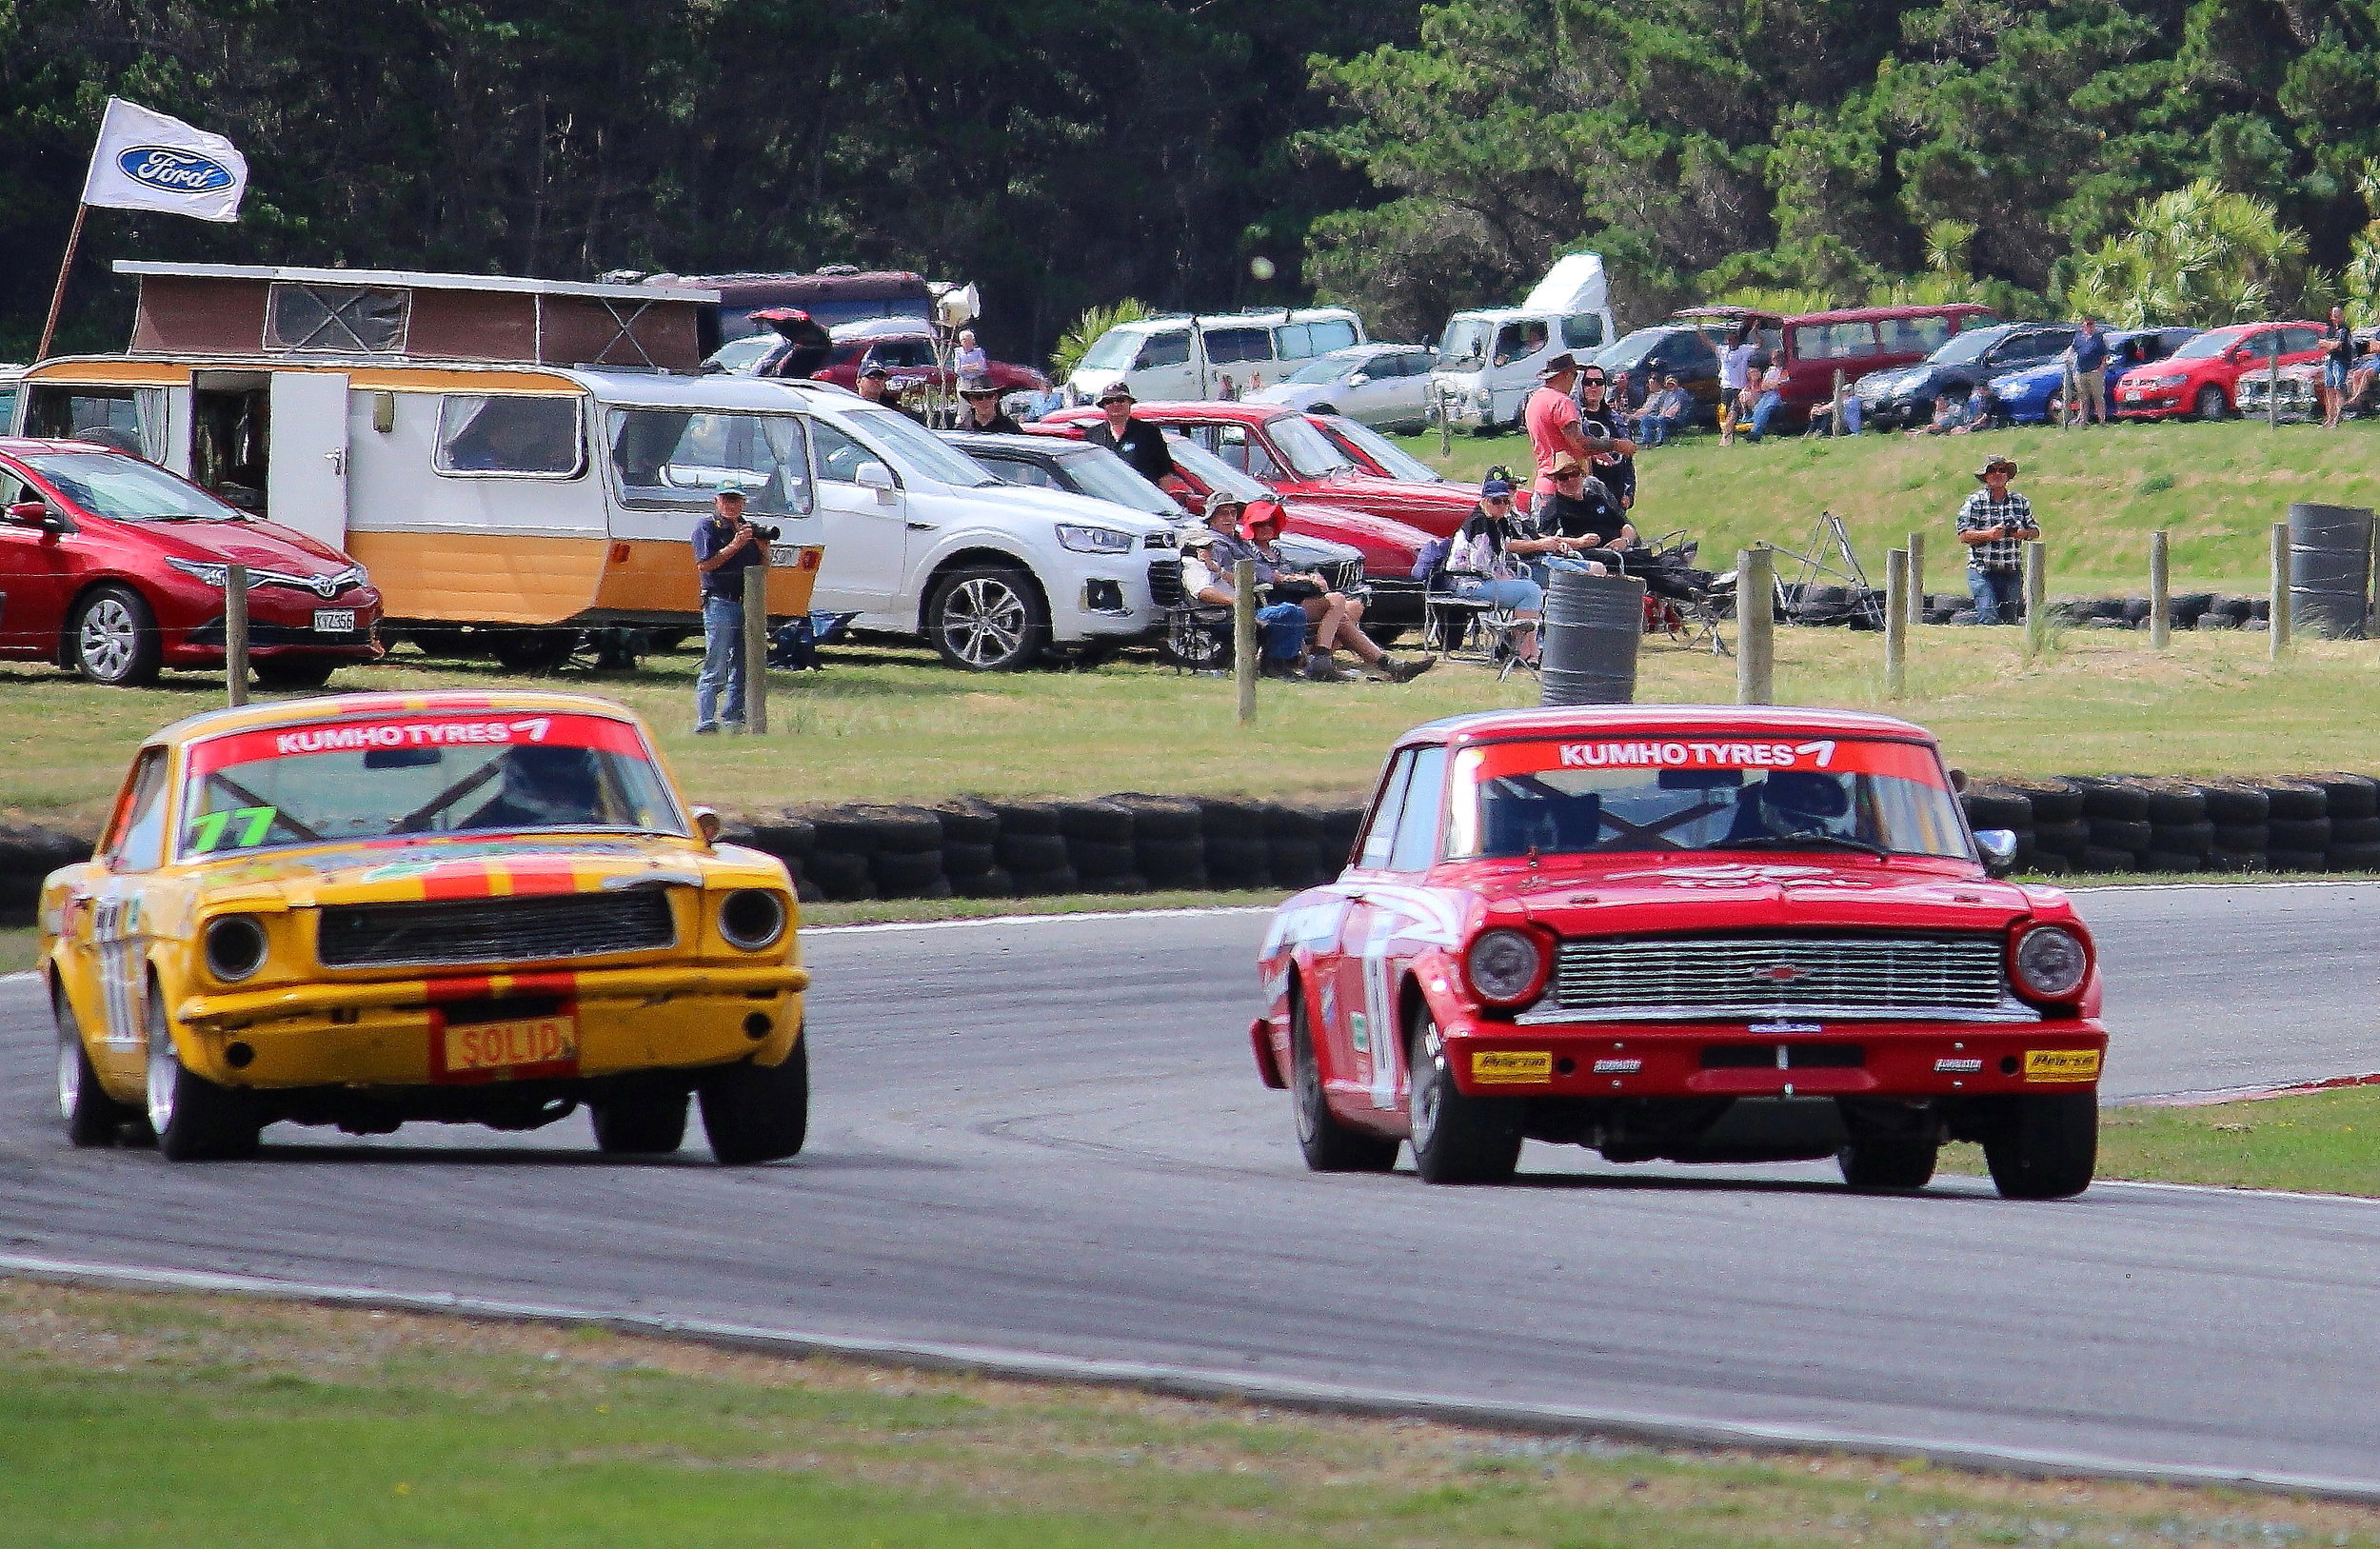  Wayne Tuffley (Invercargill) in his Ford Mustang charges hard to pull alongside Keith McDonald (Dunedin) in his Chevrolet Nova 